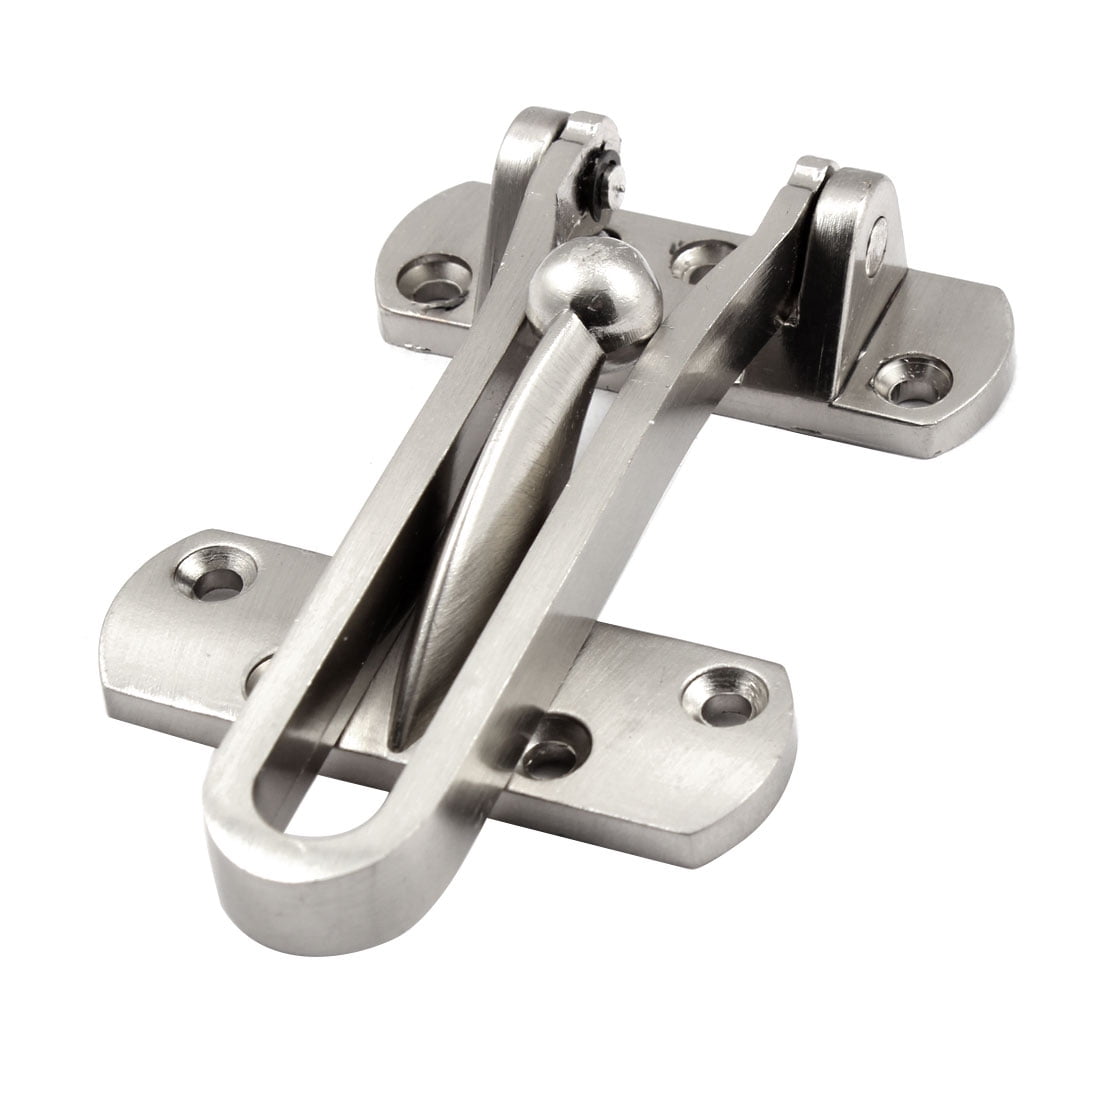 Home Hotel Barn Door Stainless Steel Lock Security Guard Buckle Clasp Latch